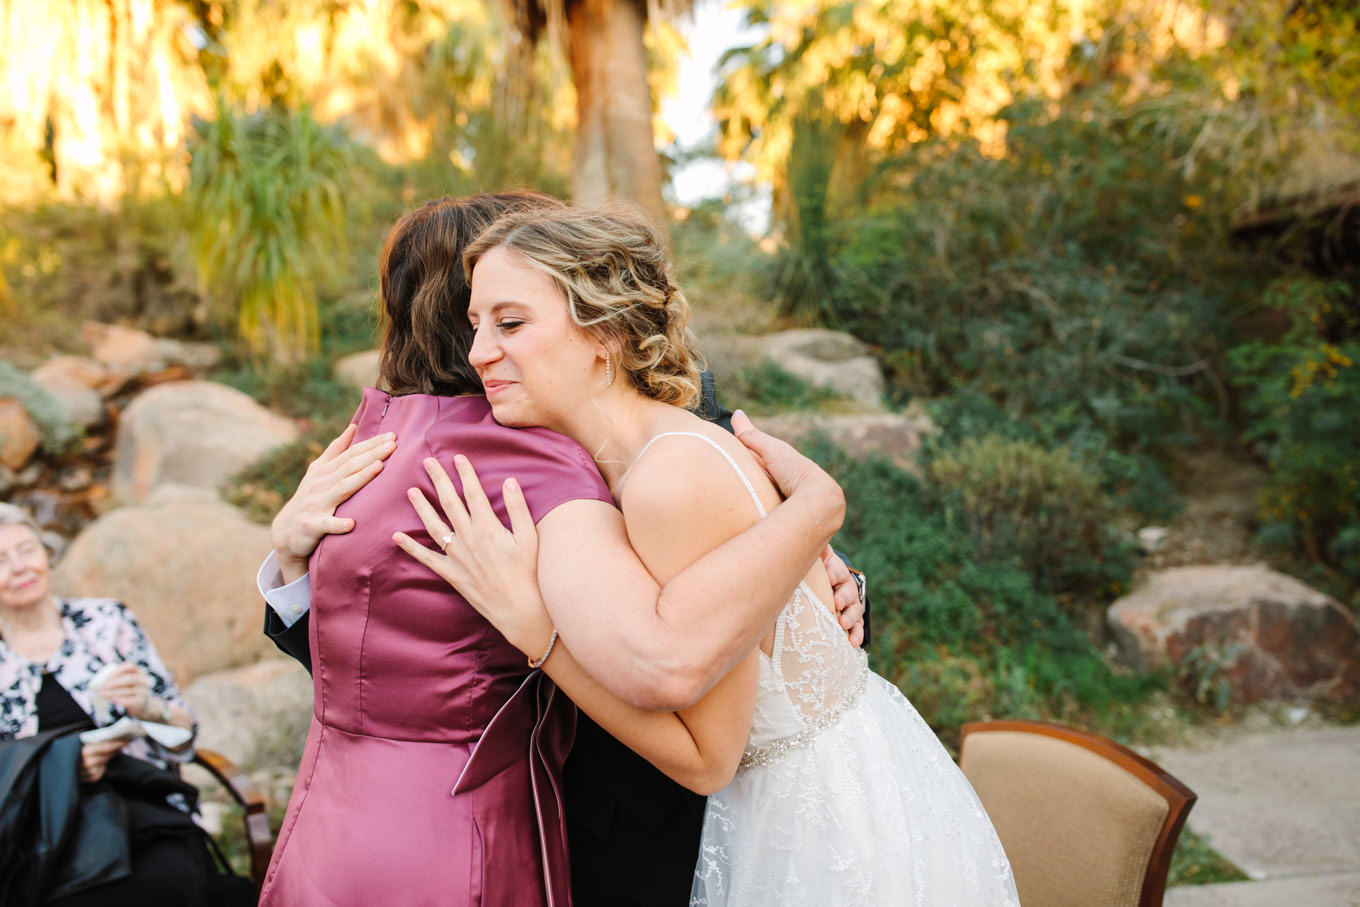 Bride and mom hugging | Living Desert Zoo & Gardens wedding with unique details | Elevated and colorful wedding photography for fun-loving couples in Southern California |  #PalmSprings #palmspringsphotographer #gardenwedding #palmspringswedding  Source: Mary Costa Photography | Los Angeles wedding photographer 